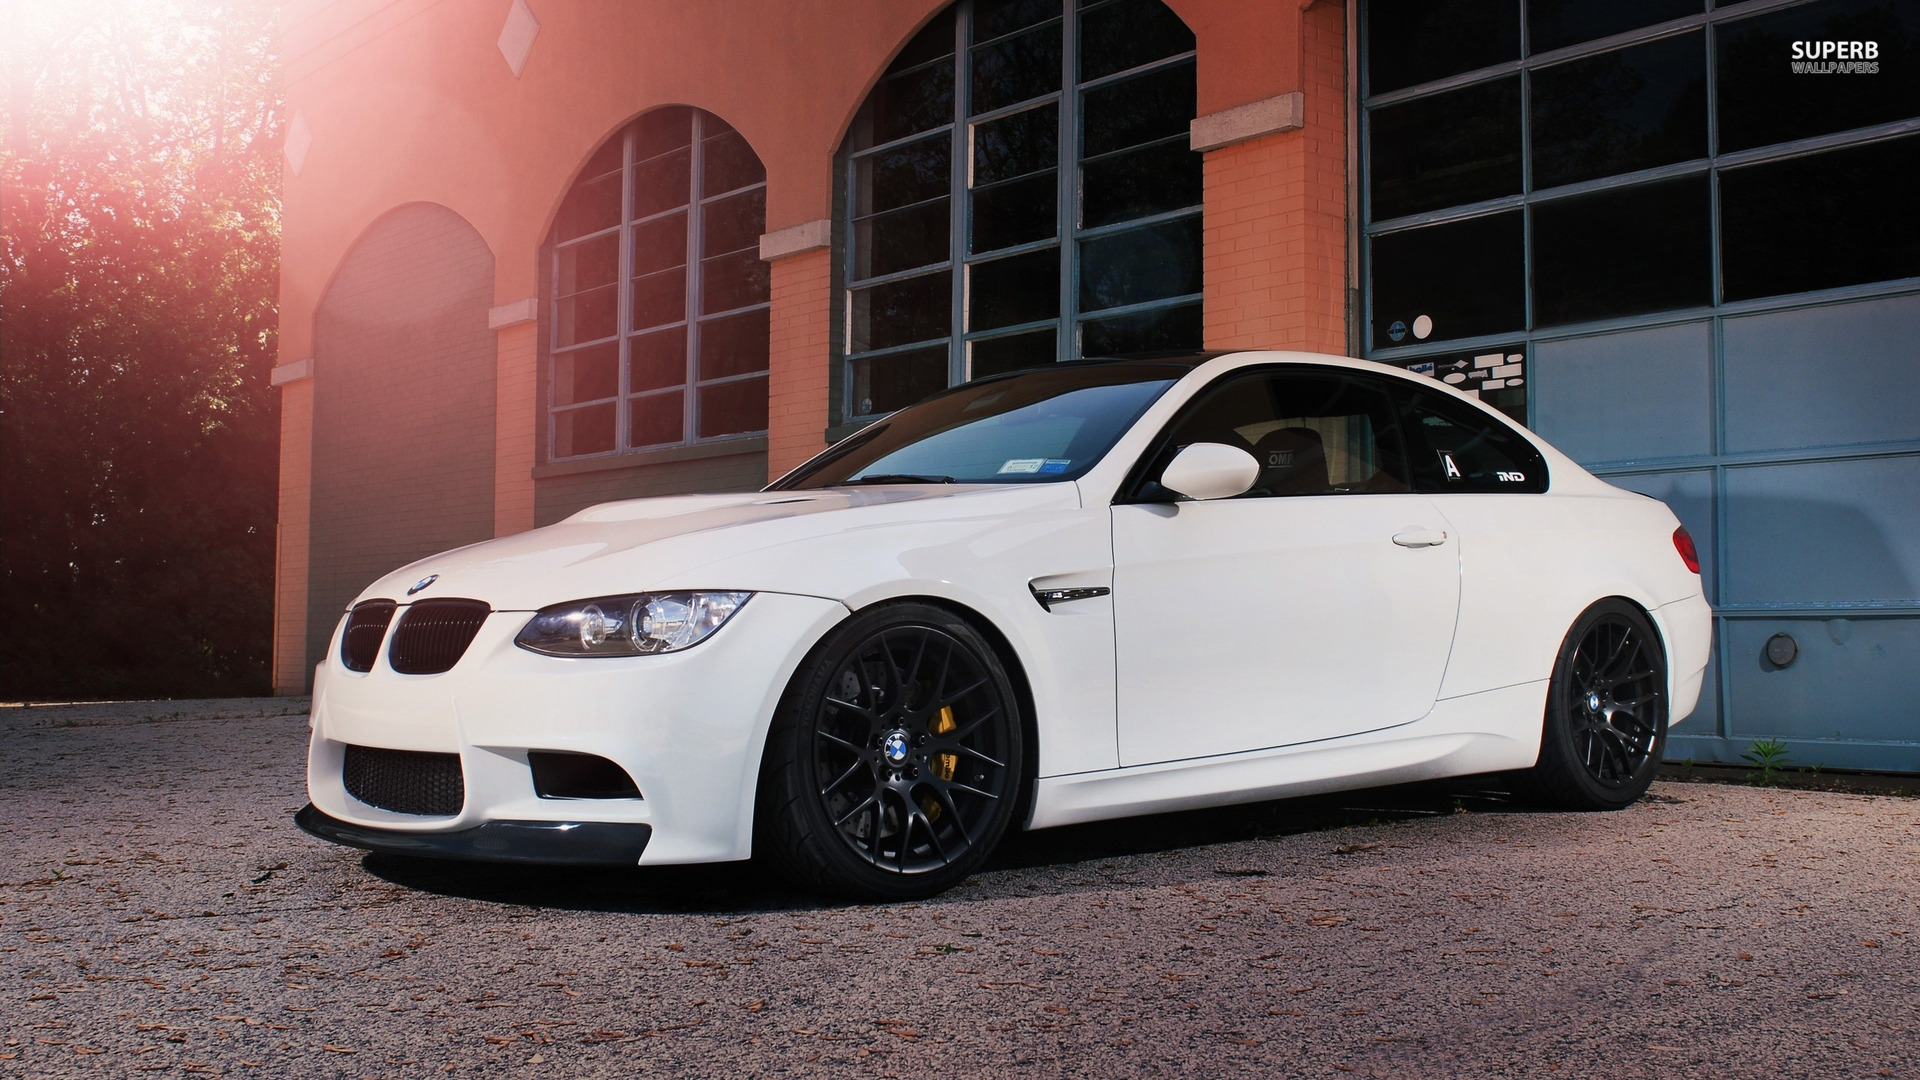 bmw m3 | In HD Wallpaper Home Design and Cars HD Wallpaper